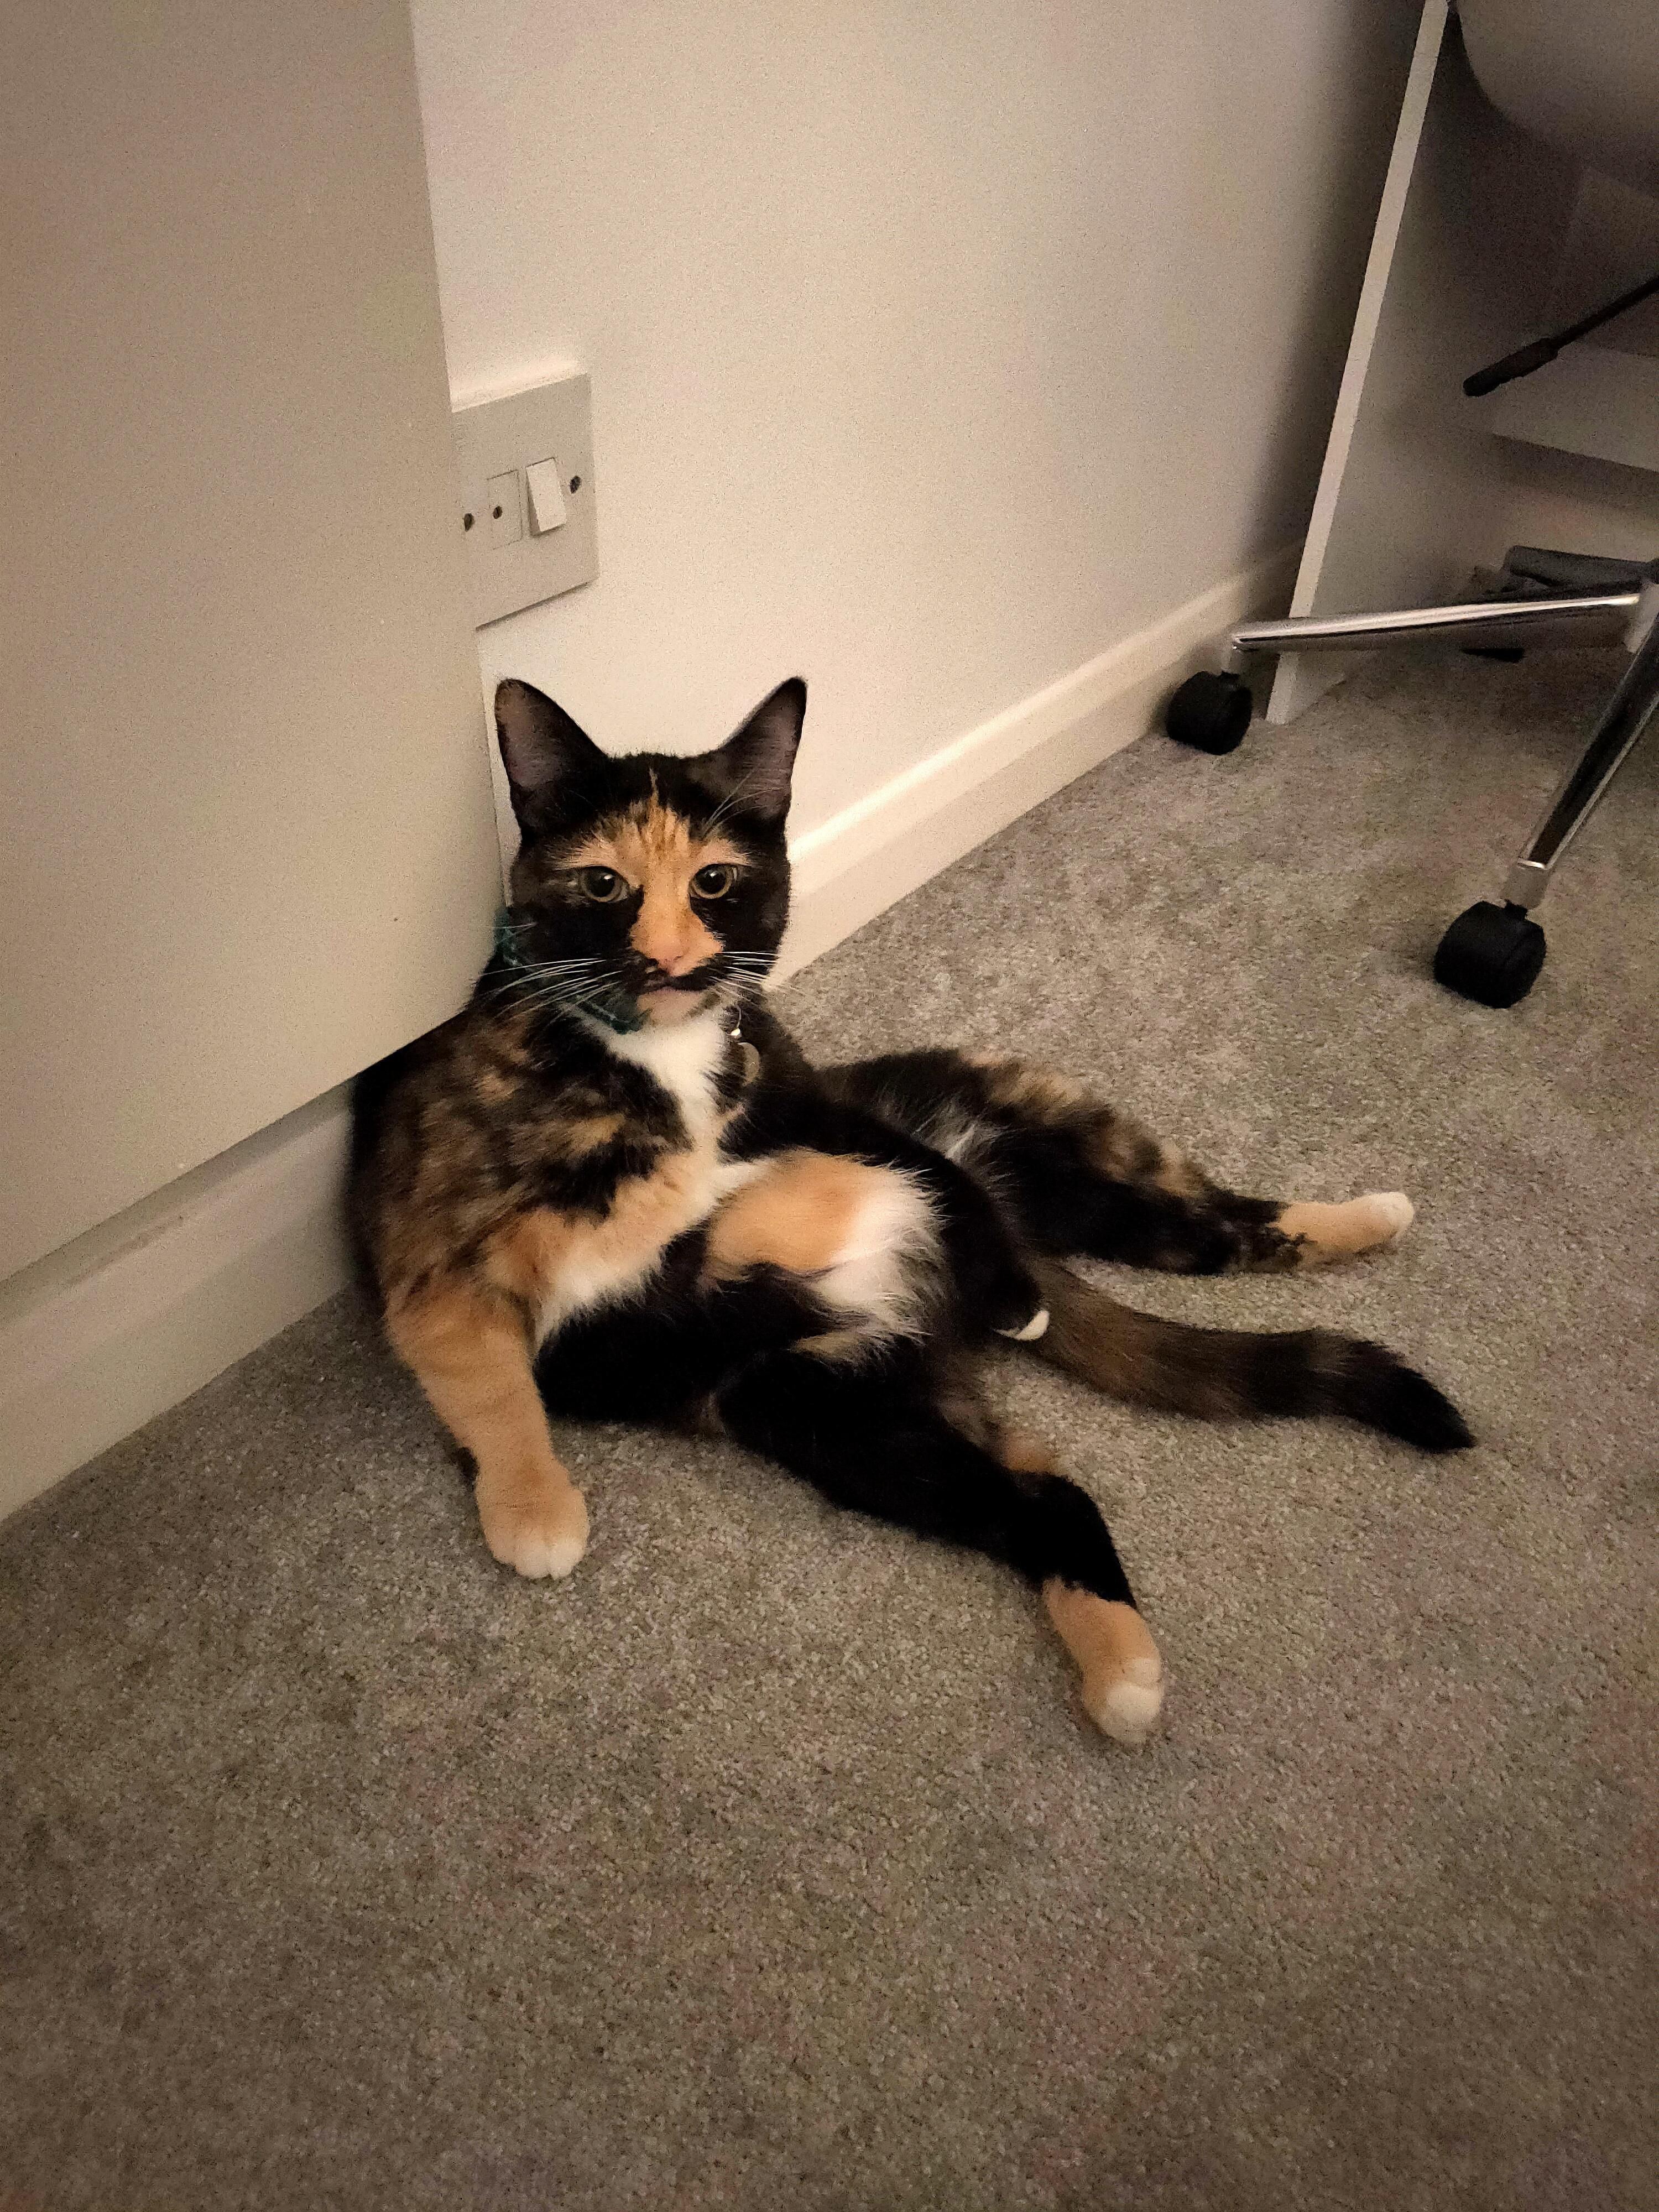 Why does she sit like this?